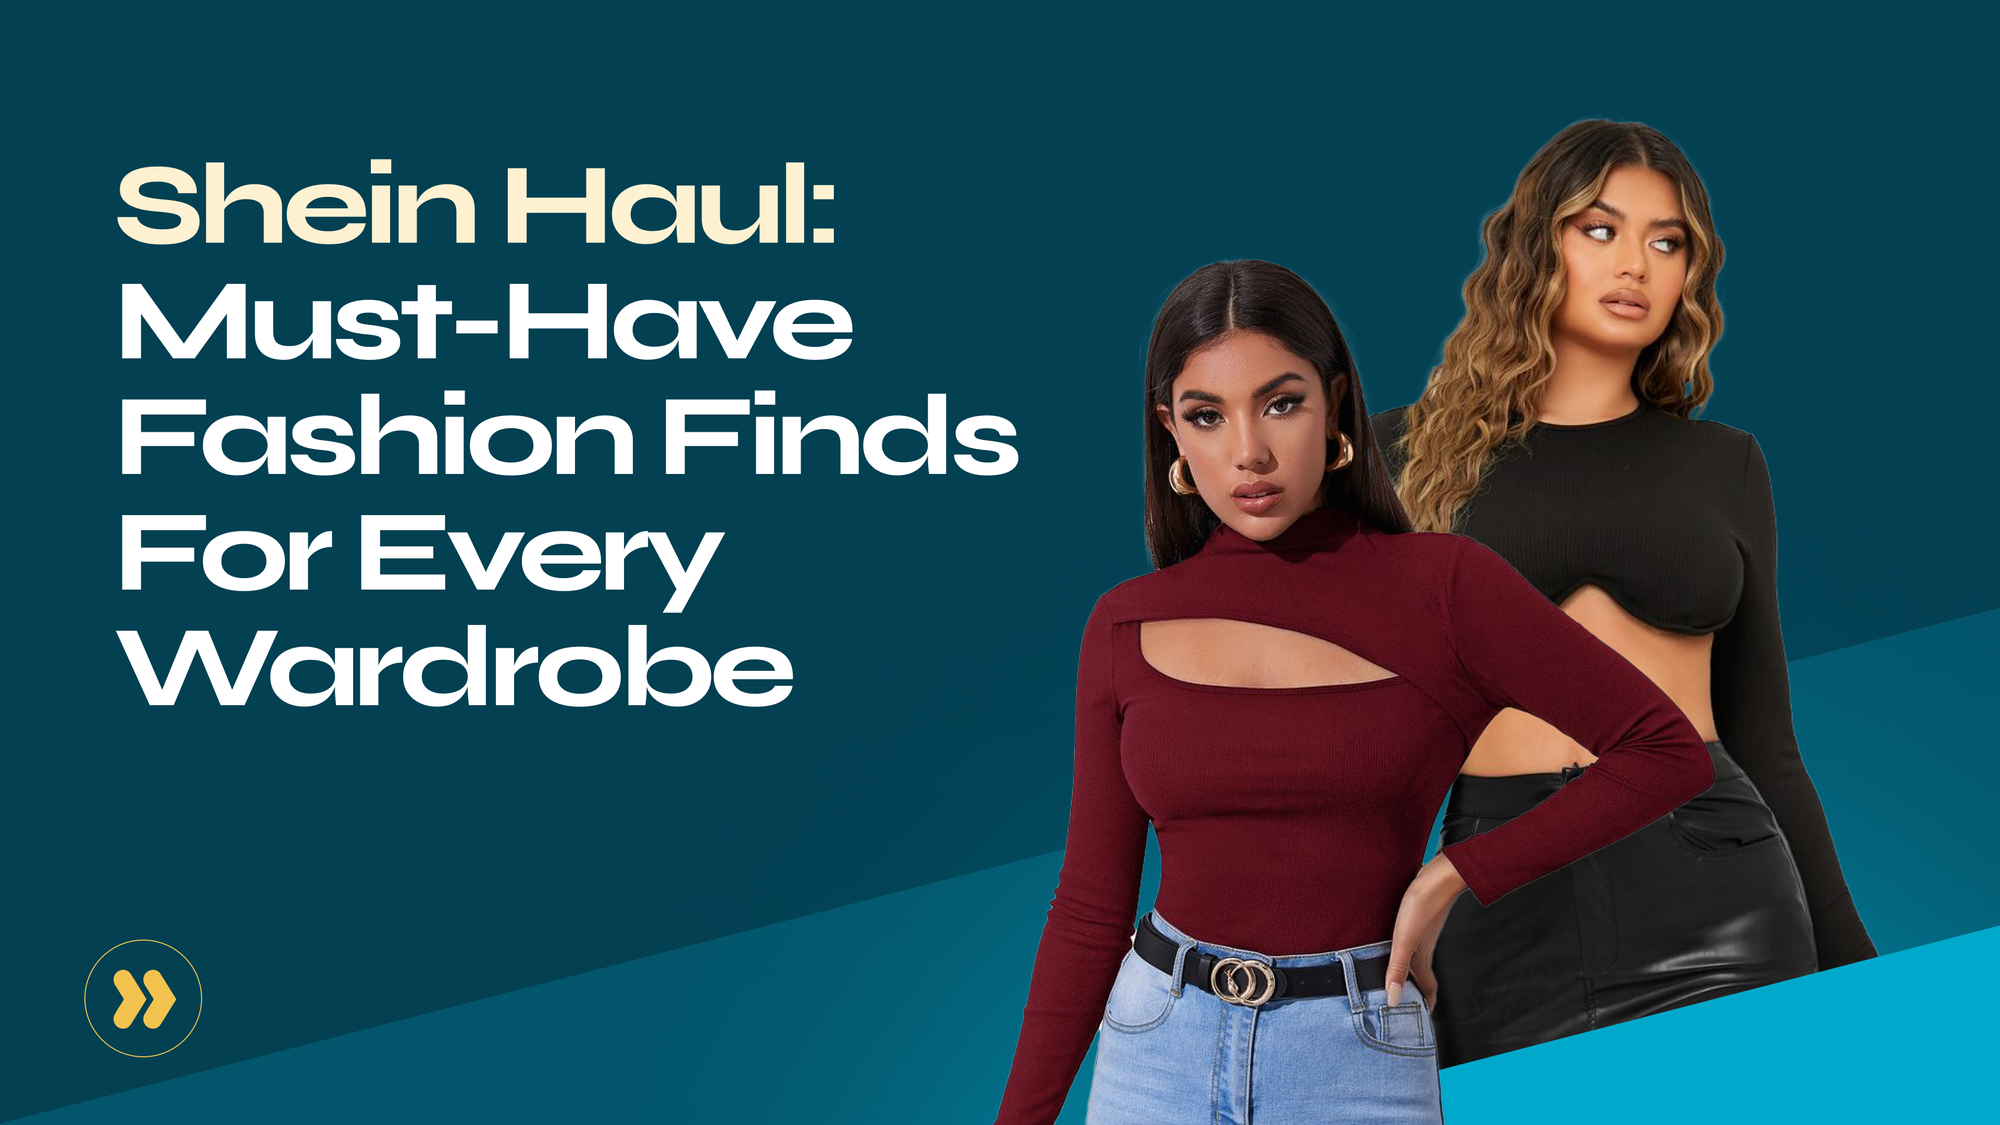 Shein Haul: Must-Have Fashion Finds for Every Wardrobe